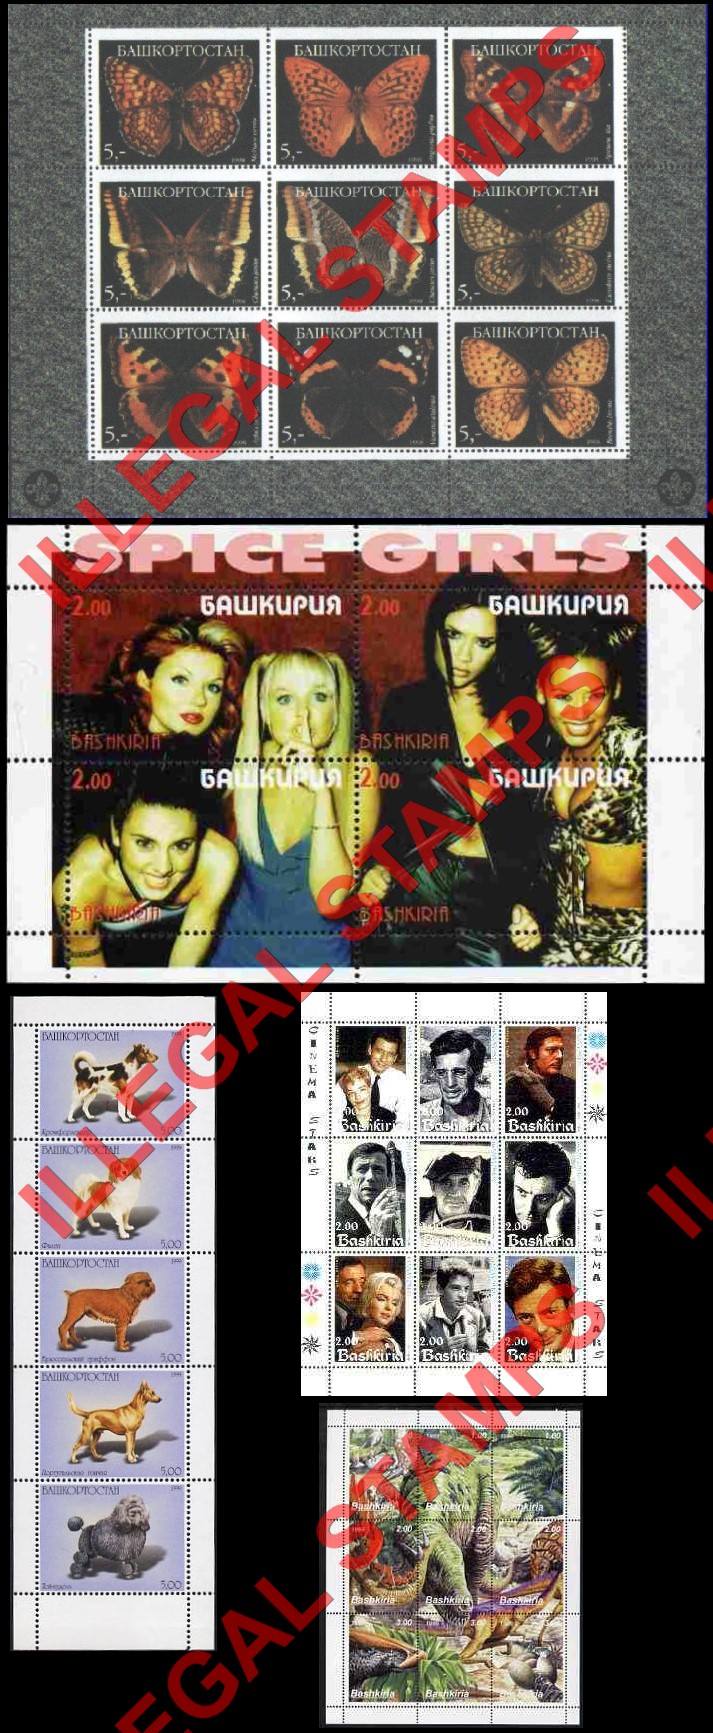 Republic of Bashkortostan 1999 Butterflies, Spice Girls, Cinema Stars, Dogs and Dinosaurs Illegal Stamps